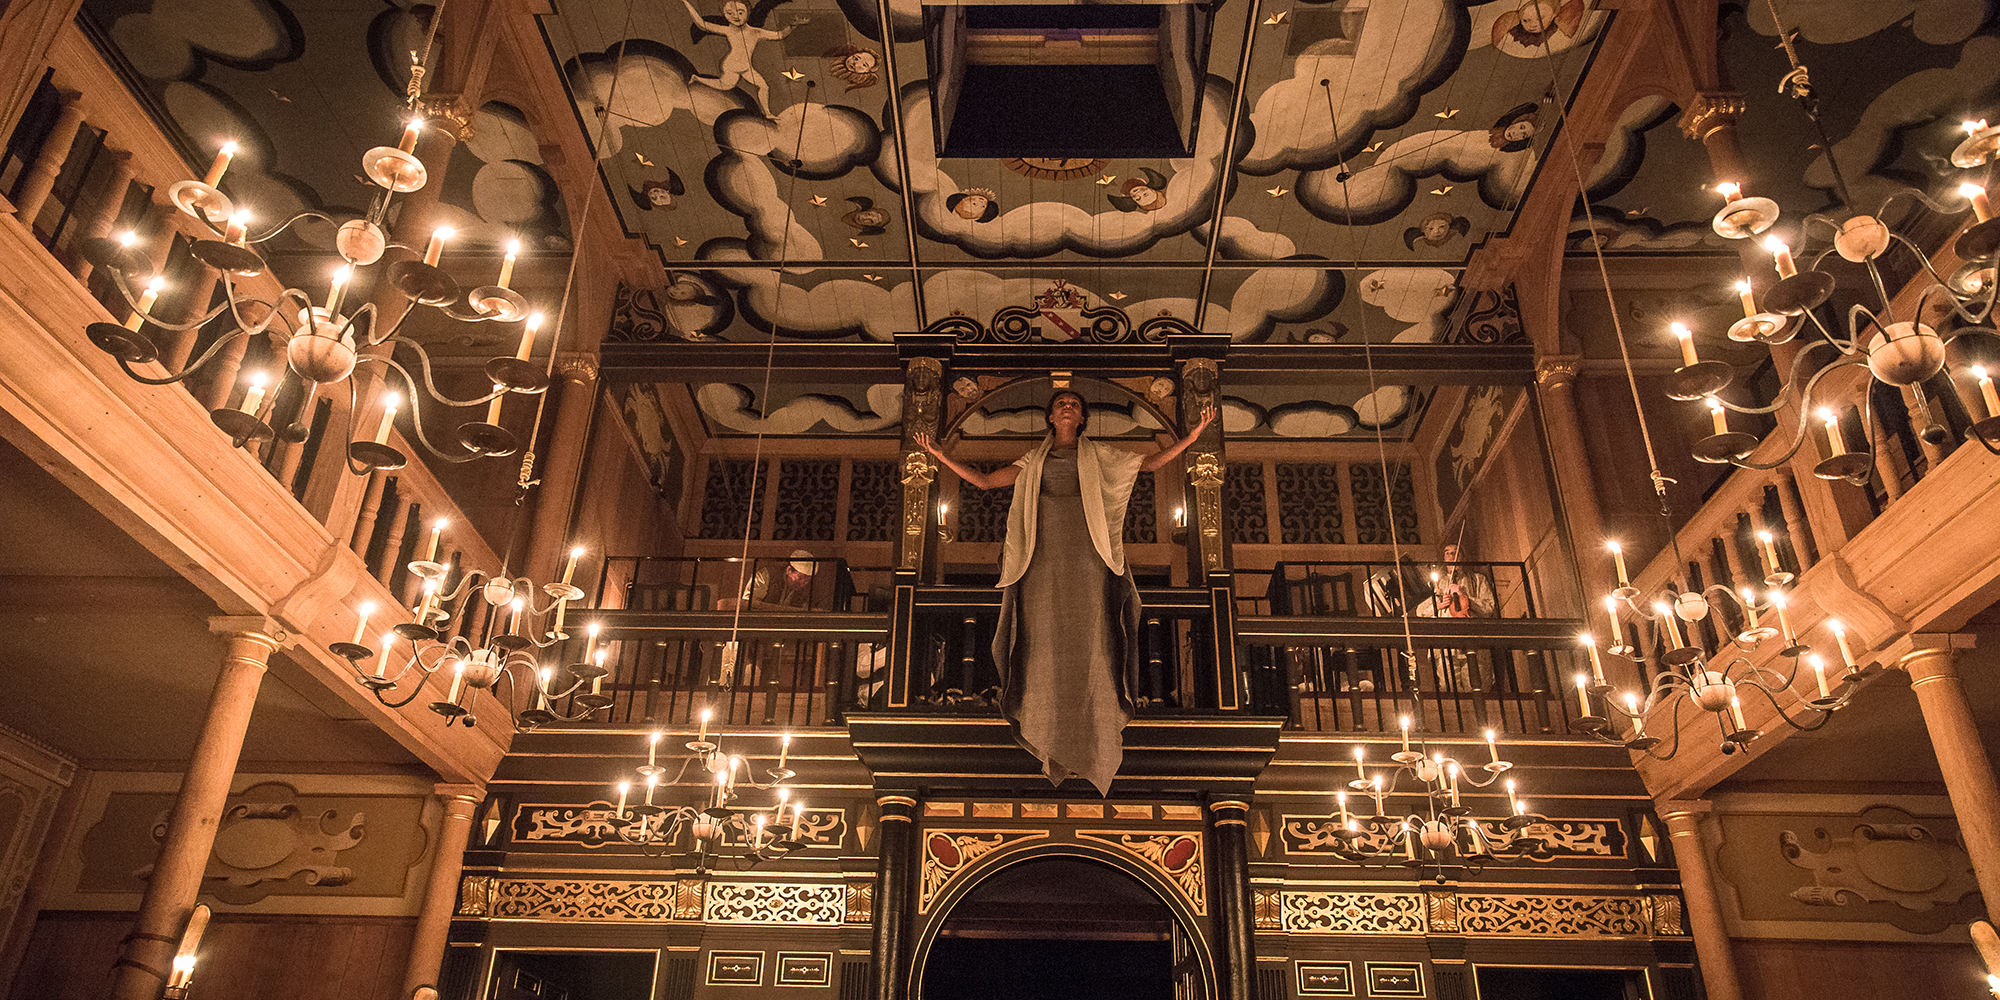 A woman descends from a trapdoor in the painted heavens of the Sam Wanamaker Playhouse, which is lit by candlelight